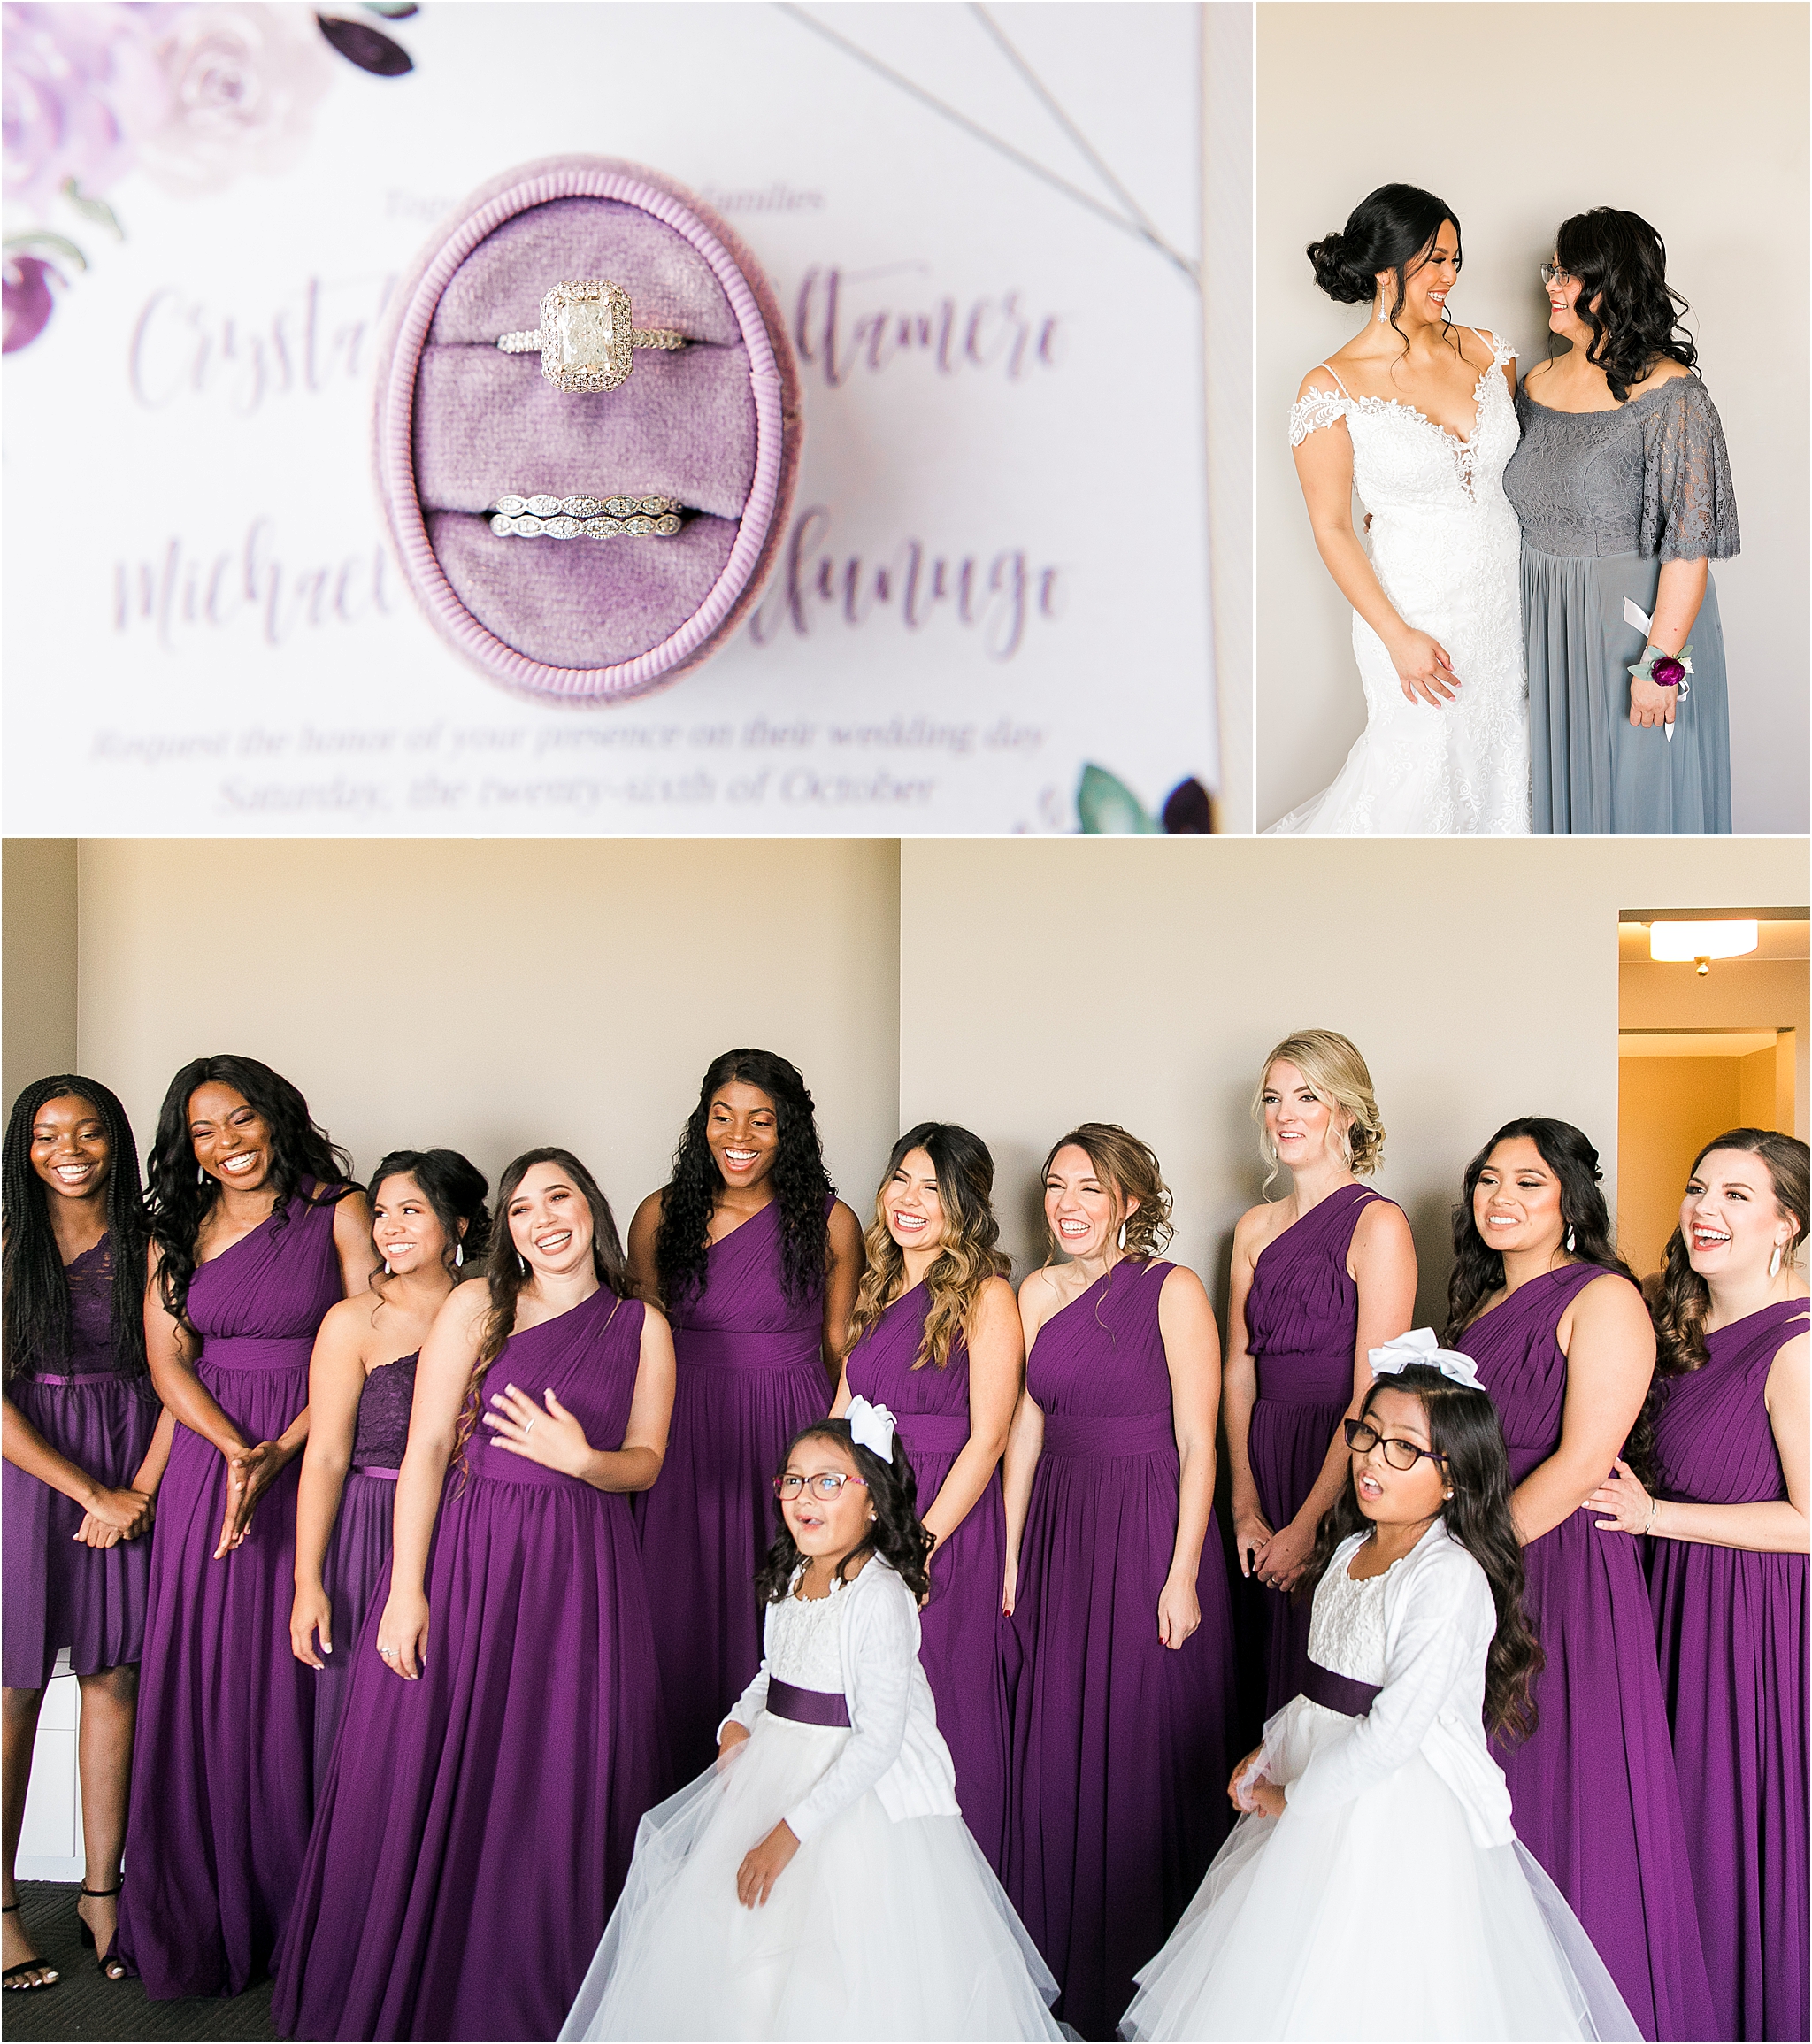 First look with bridesmaids at The sheraton in McKinney, TX by DFW Wedding Photographer Jillian Hogan 